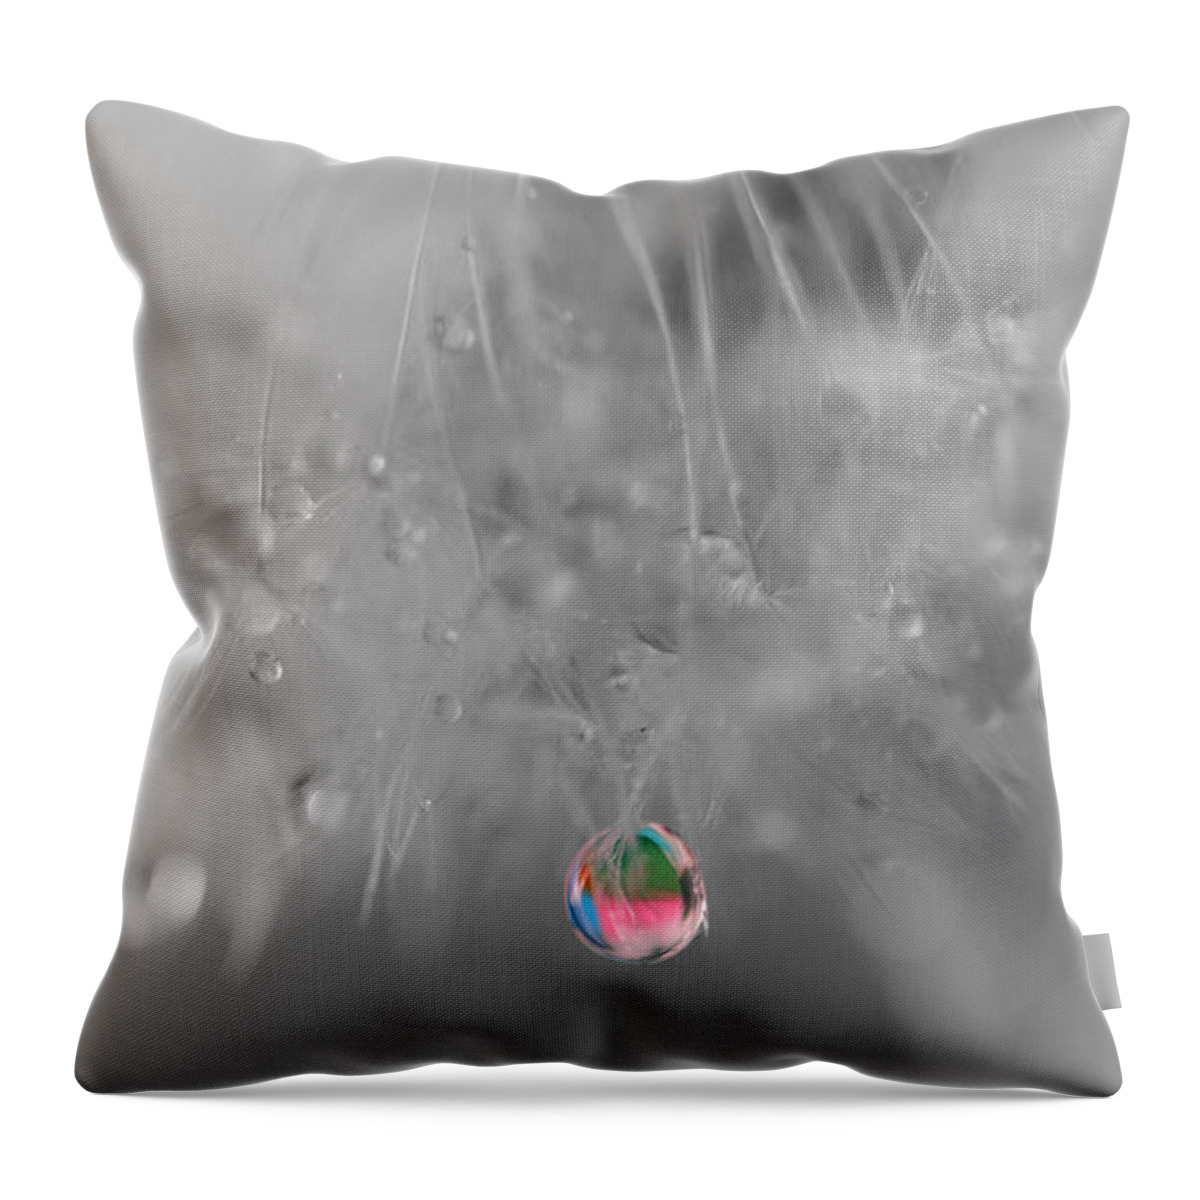 Dew Drop Throw Pillow featuring the photograph Nature's Crystal Ball by Marianna Mills